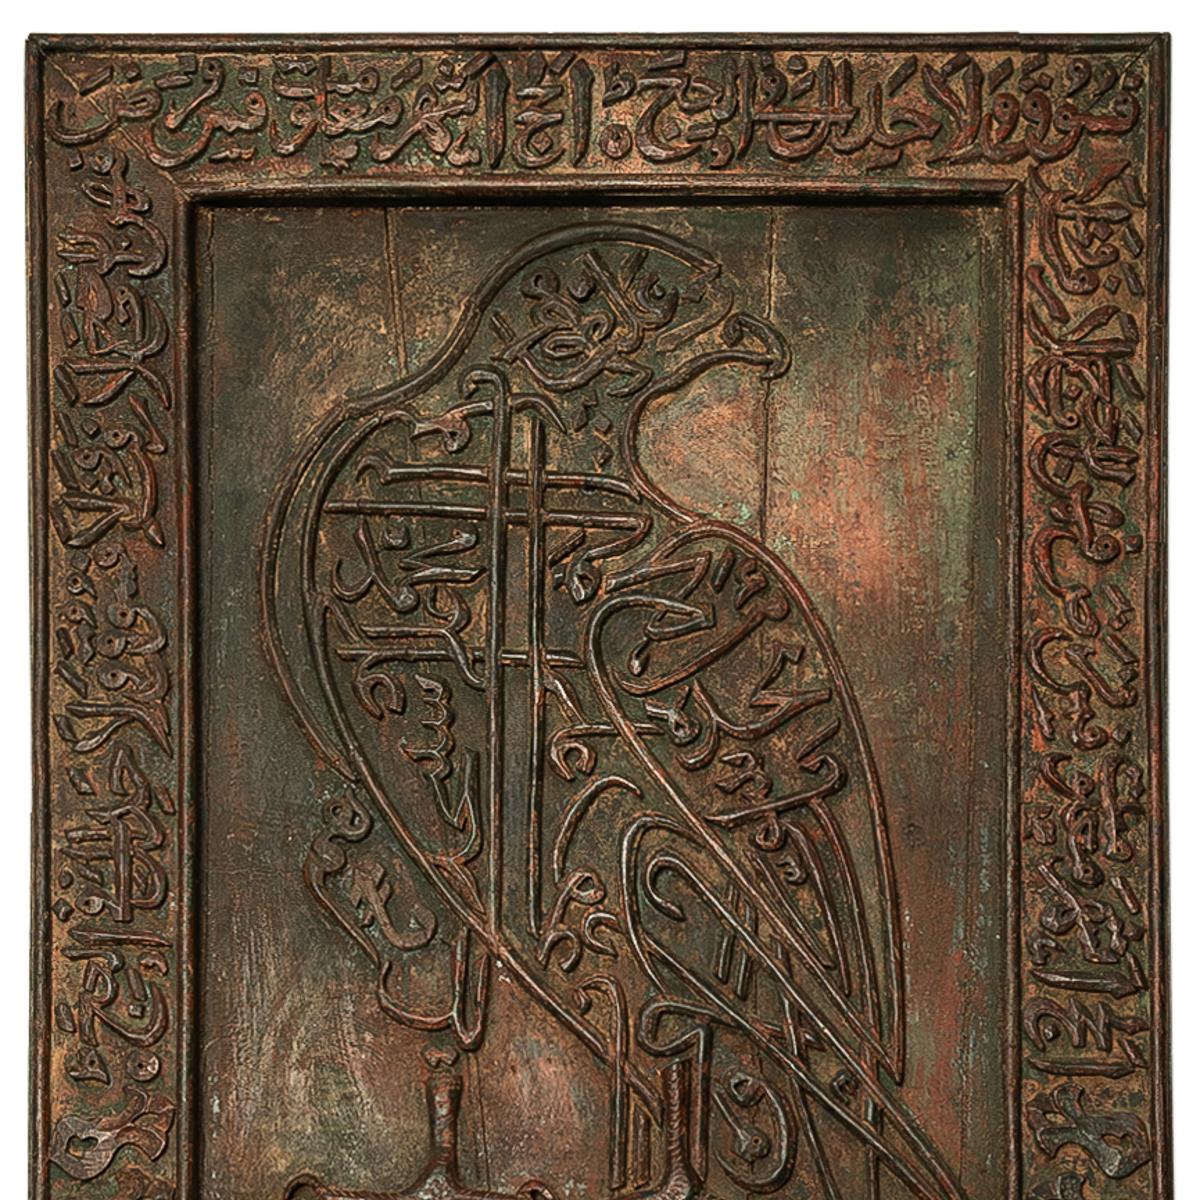 A large & Important Islamic Mid-19th Century wooden panel, decorated with a falcon and Quranic calligraphy, Deccan, Circa 1850.
Please note an almost identical panel sold at Sotheby's Lot # 208 